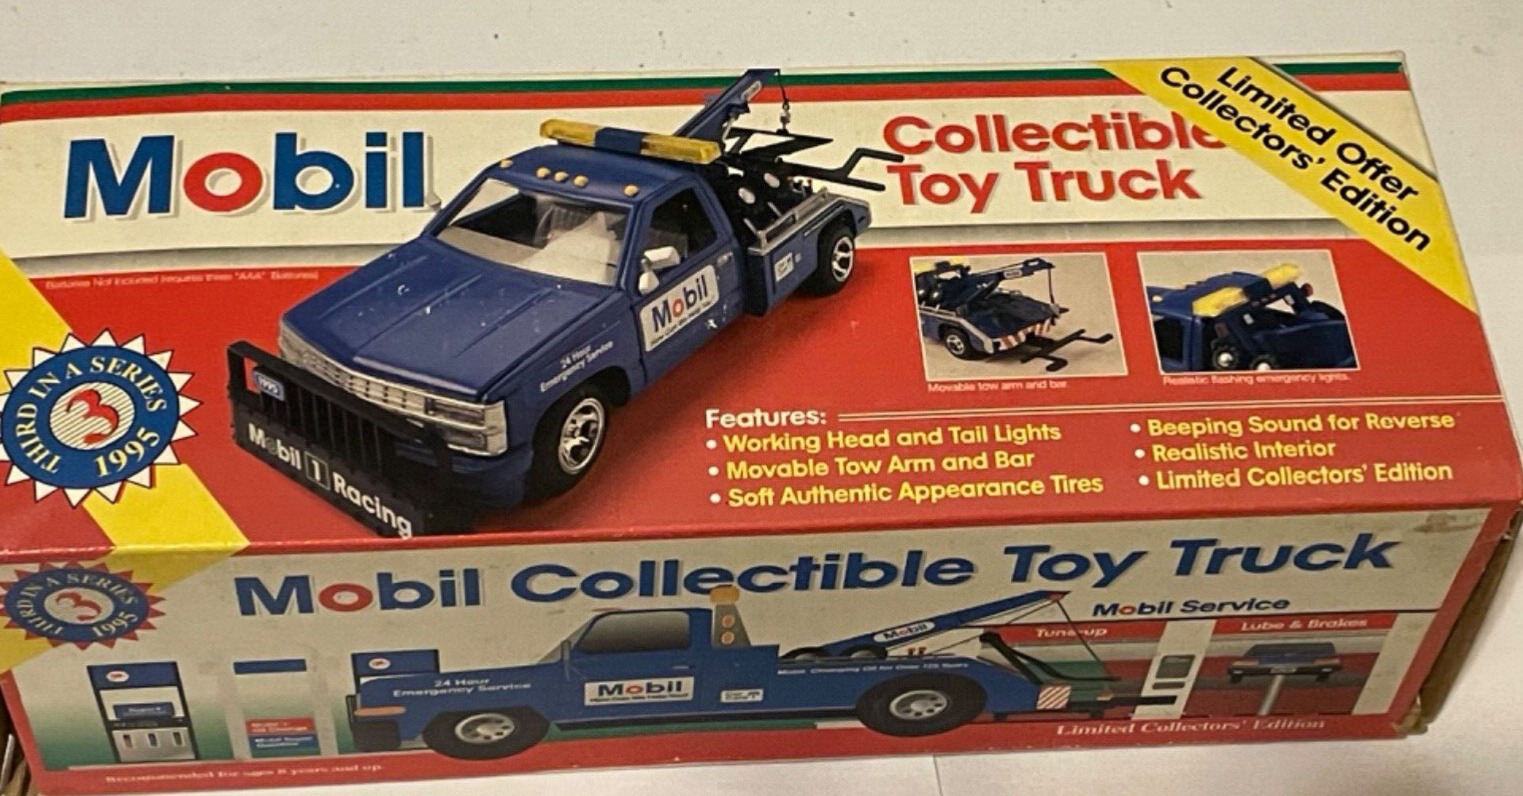 NEW IN BOX 1995 MOBIL COLLECTIBLE BLUE TOY TOW TRUCK THIRD IN SERIES WRECKER,